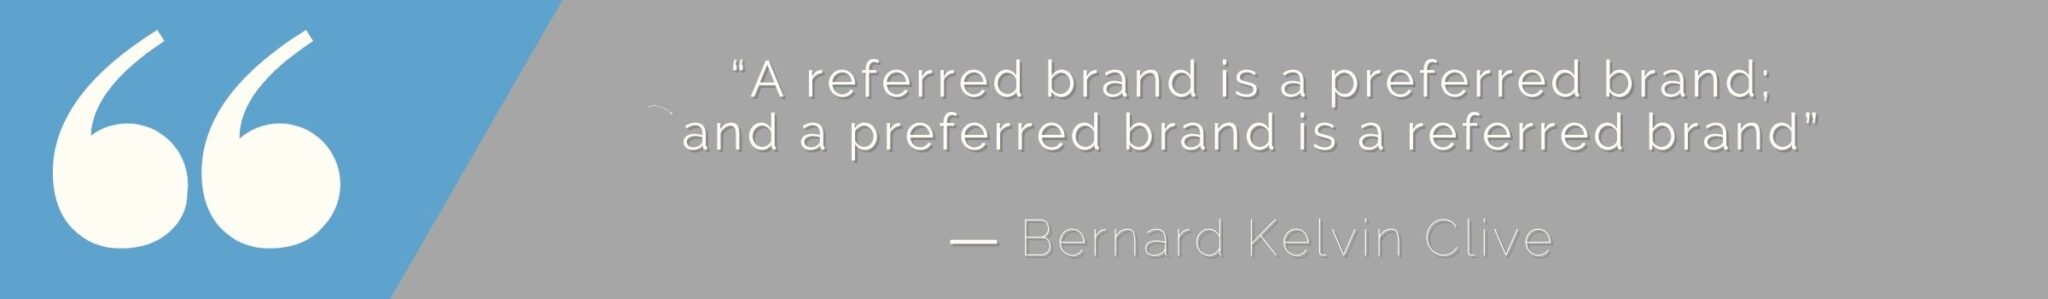 didigtal-referral-brand-preferred-brand-quote